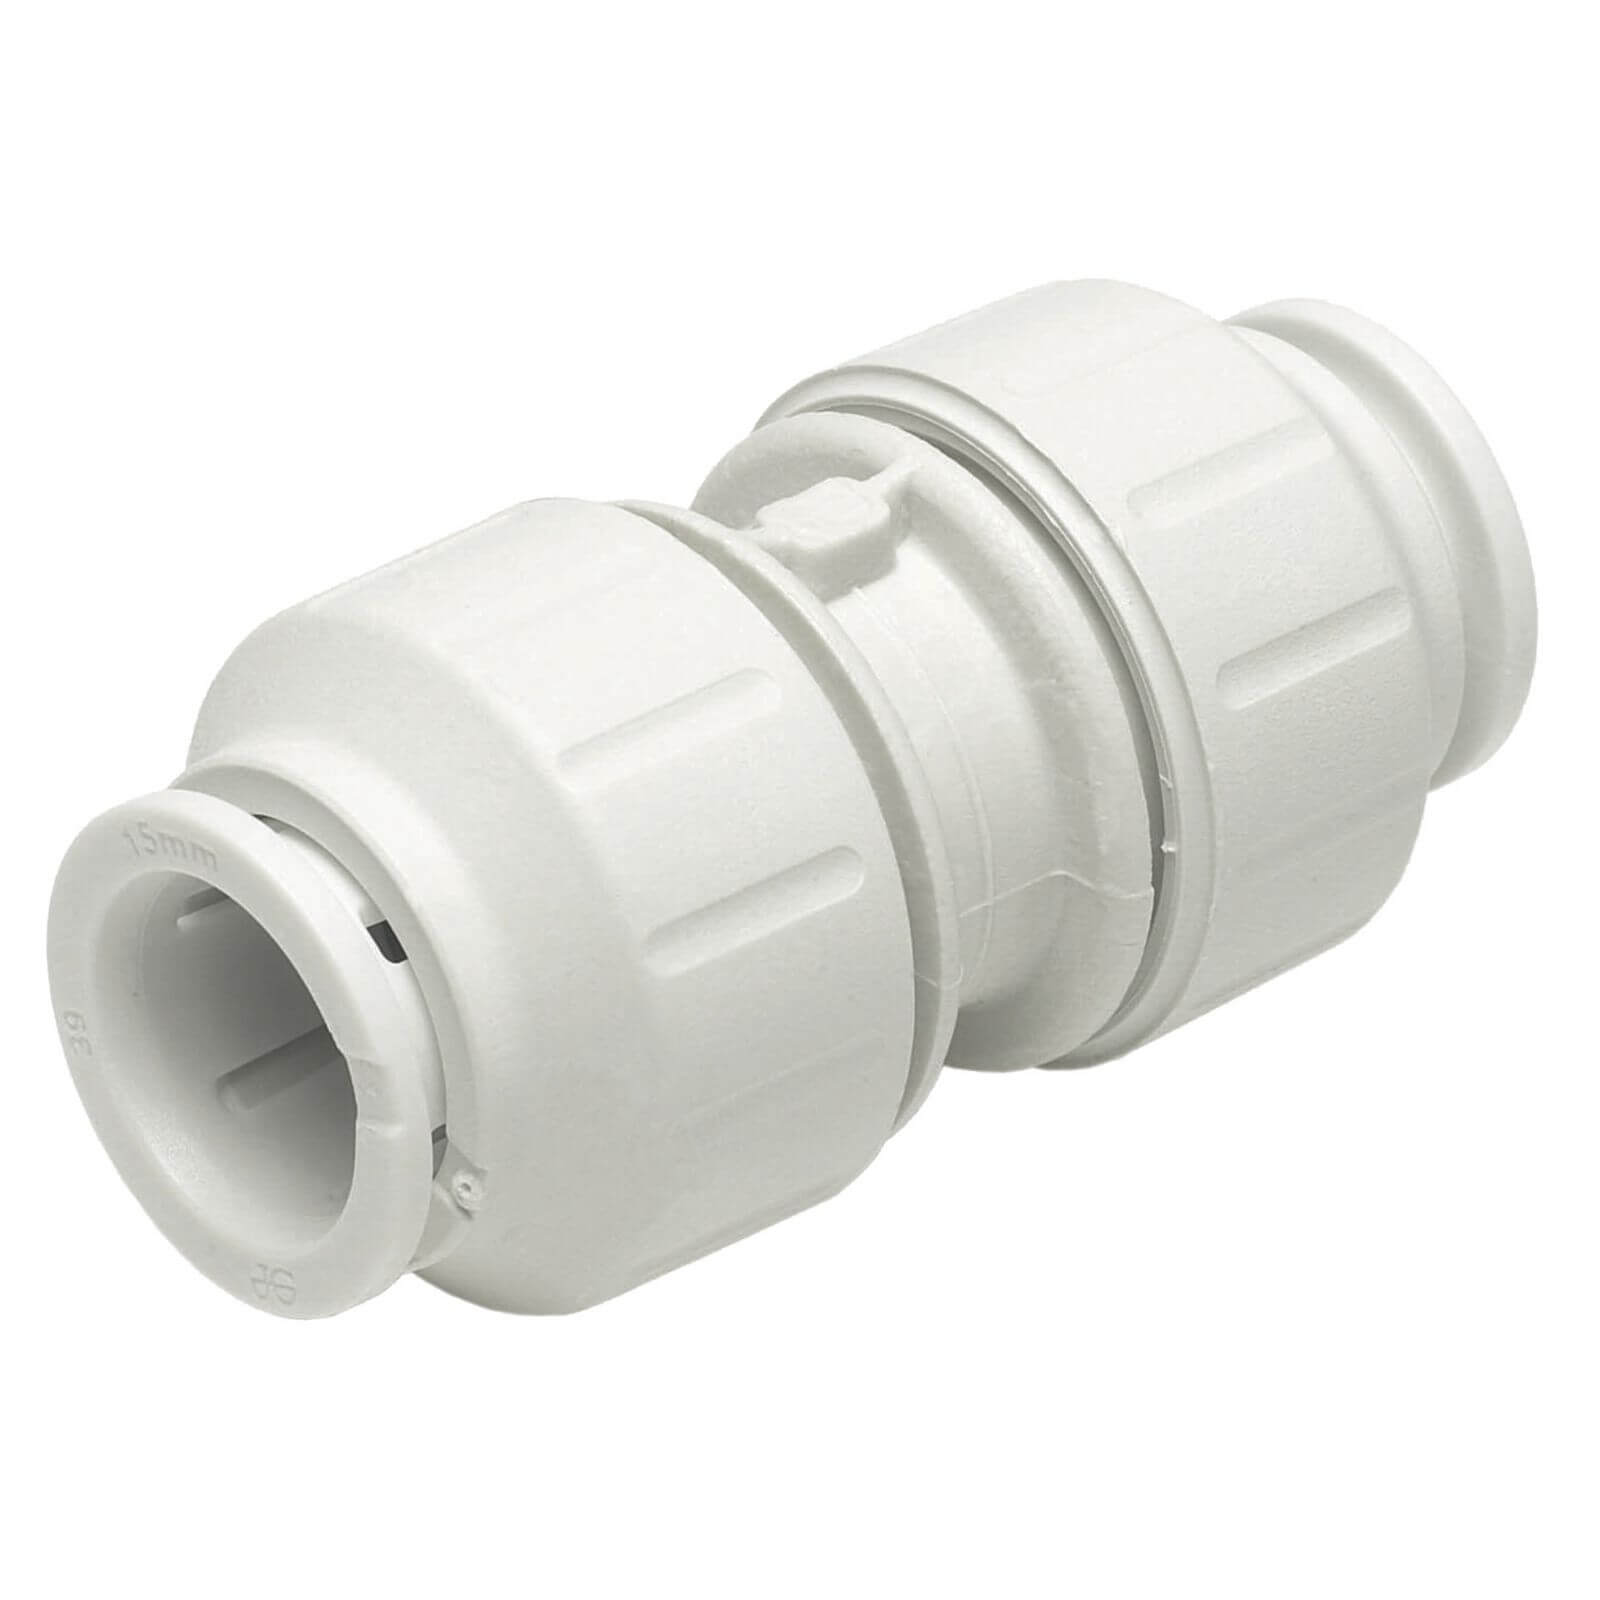 Photo of Jg Speedfit Straight Connector - 22mm - 5 Pack